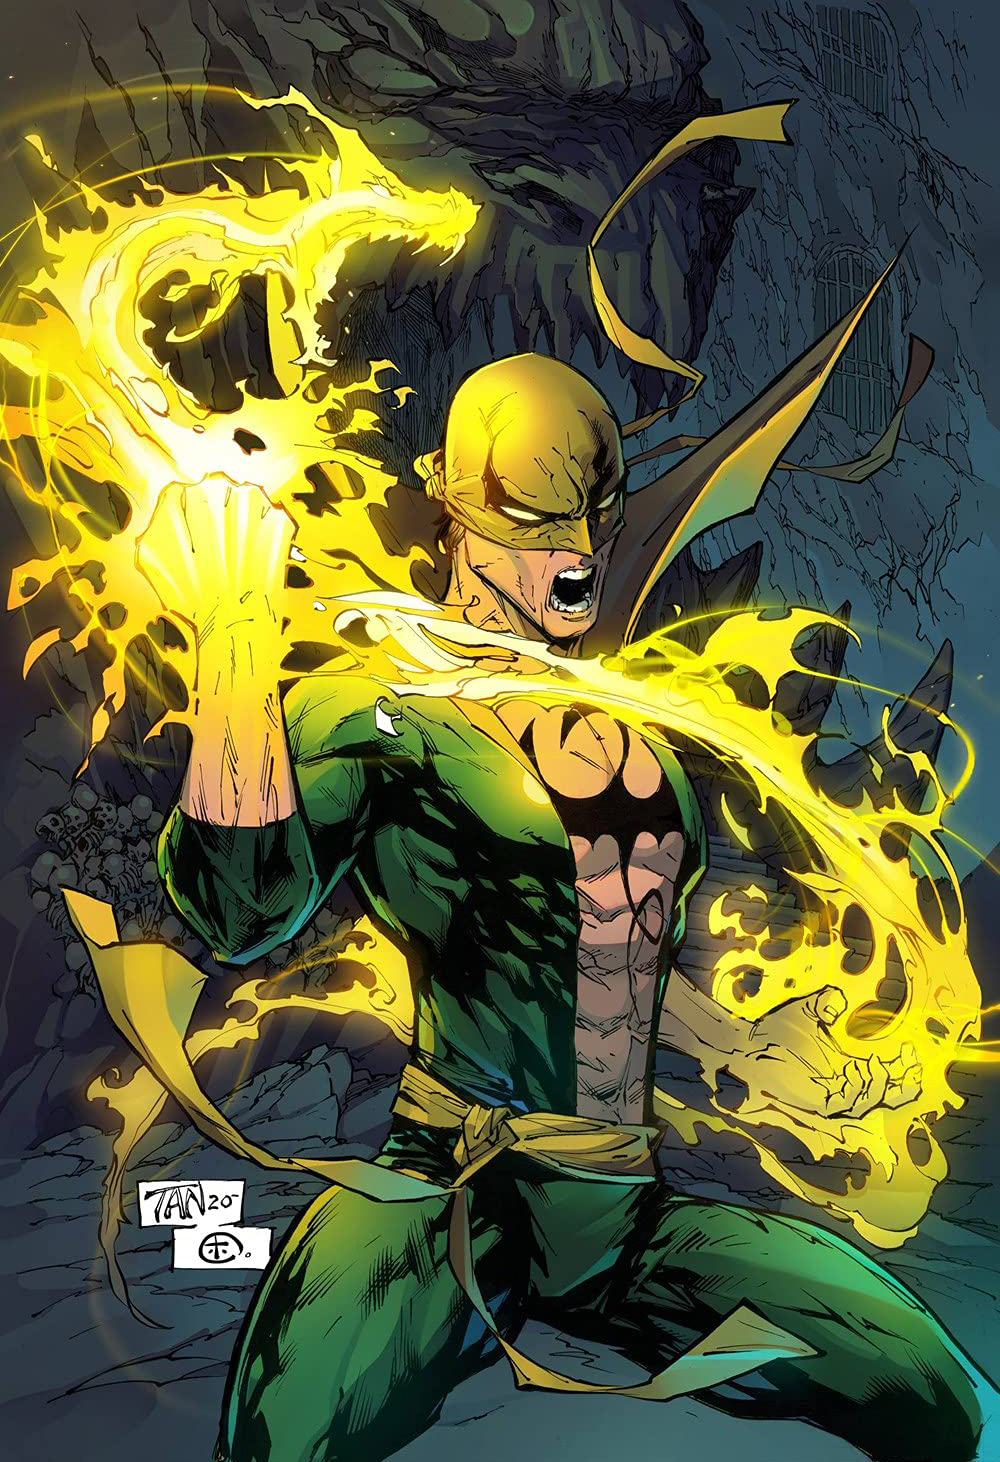 Iron_Fist_Heart_of_the_Dragon_Vol_1_1_Textless